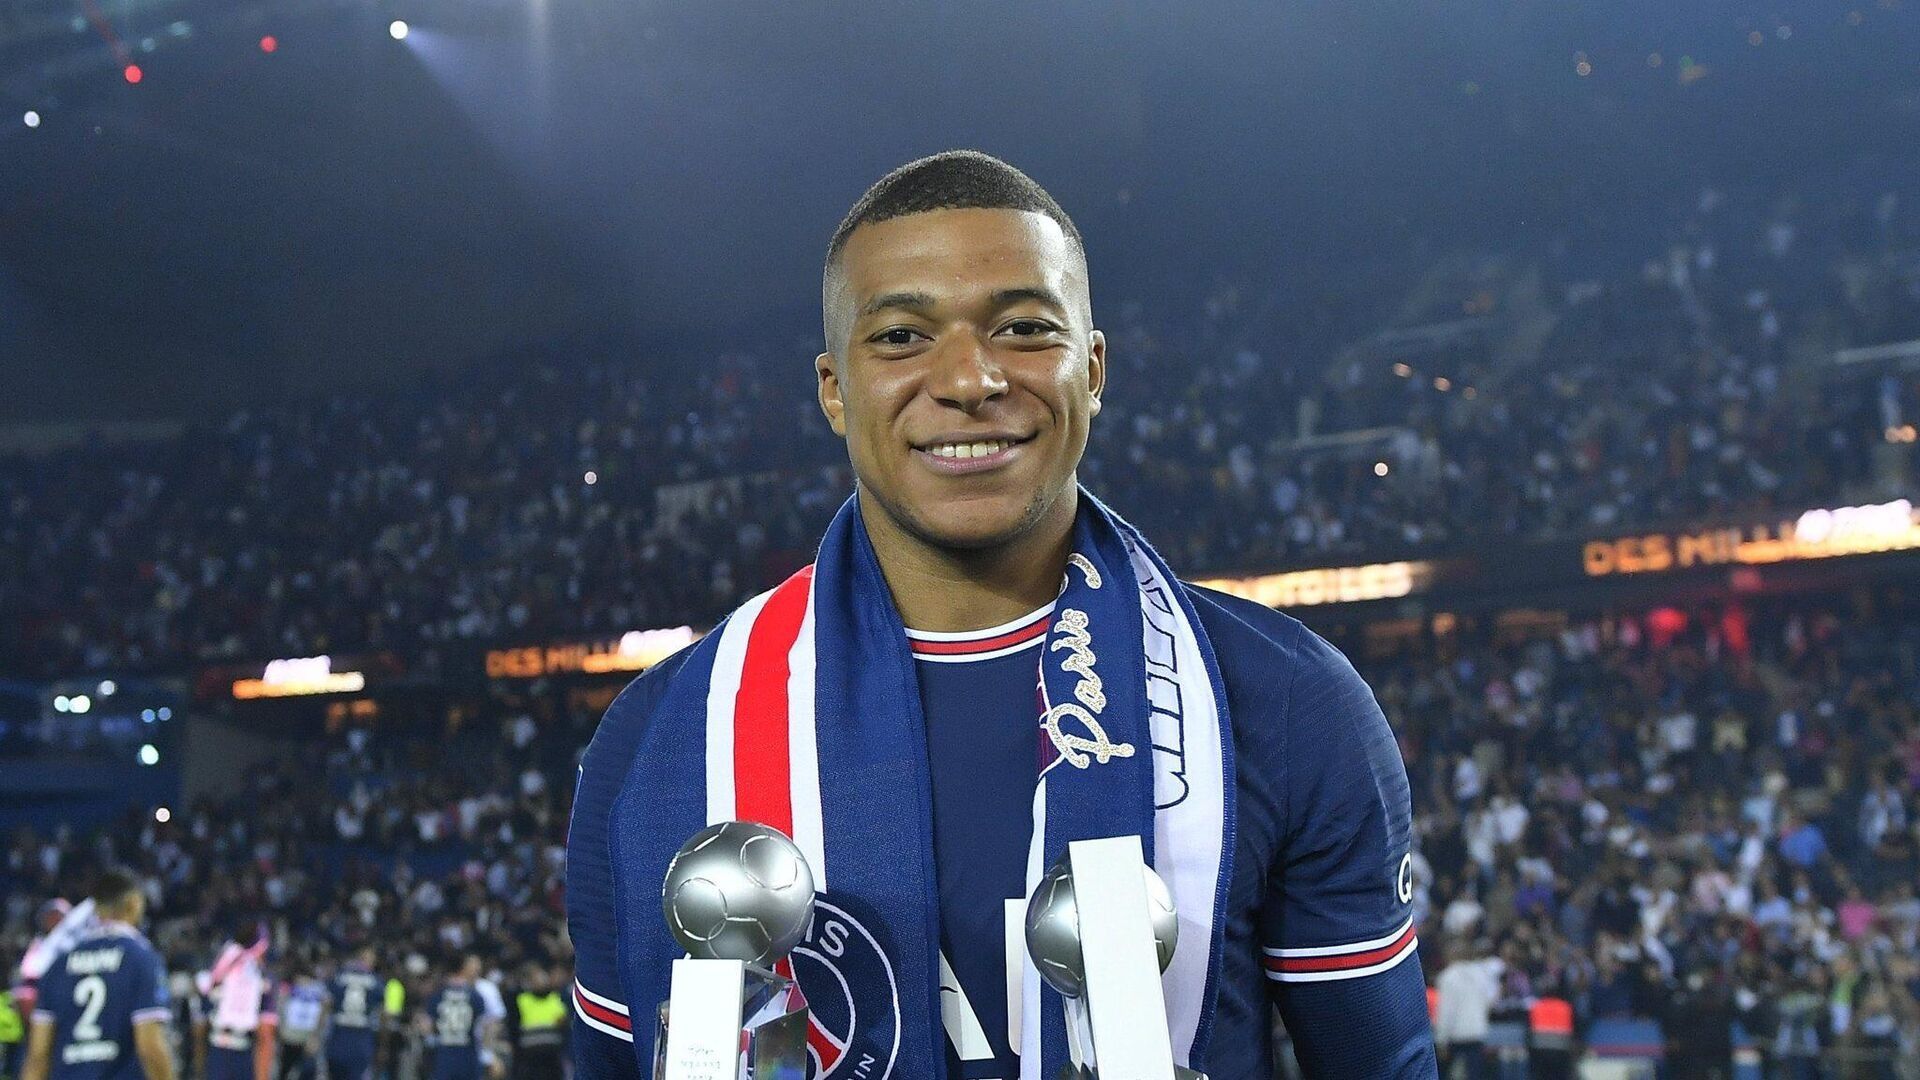 Mbappe Invited Macron Among 250 Guests To Farewell Dinner In Paris